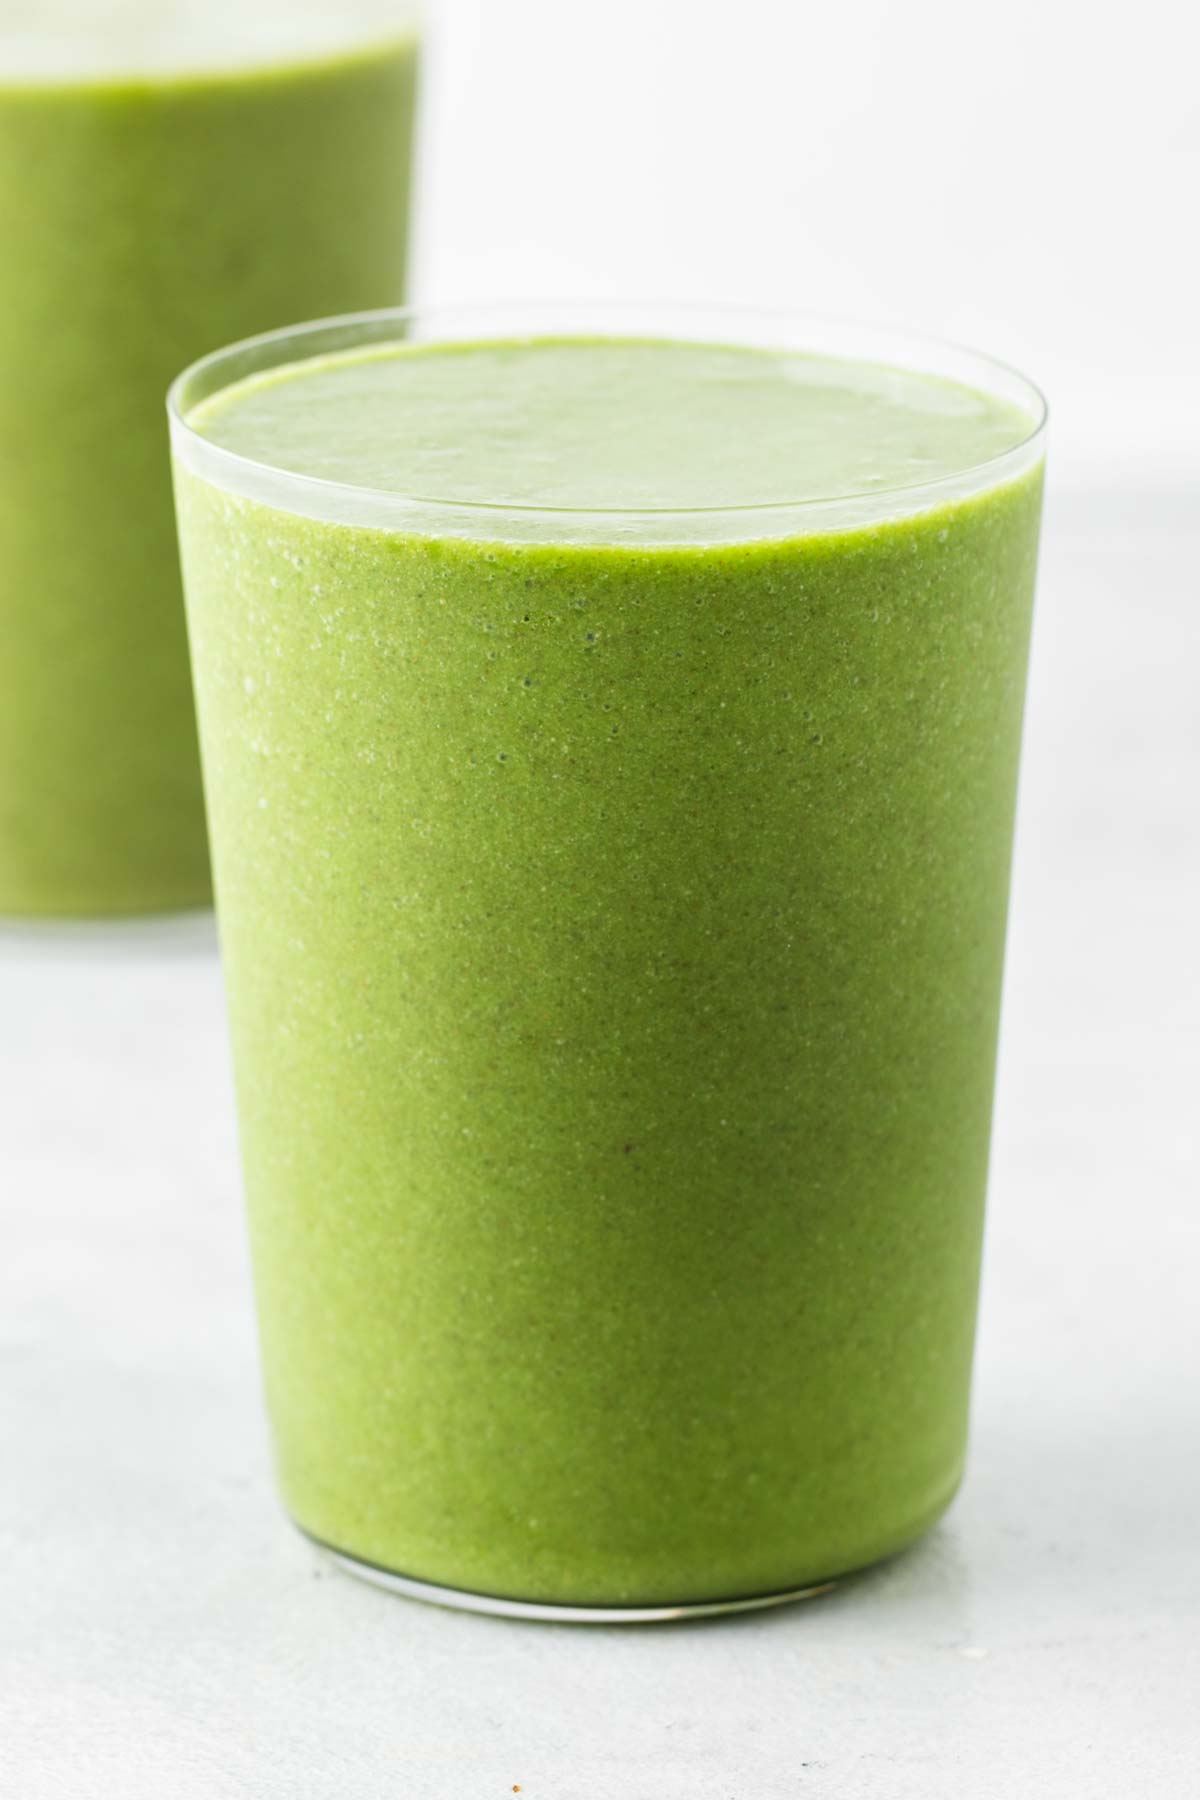 Spinach smoothie in a glass.